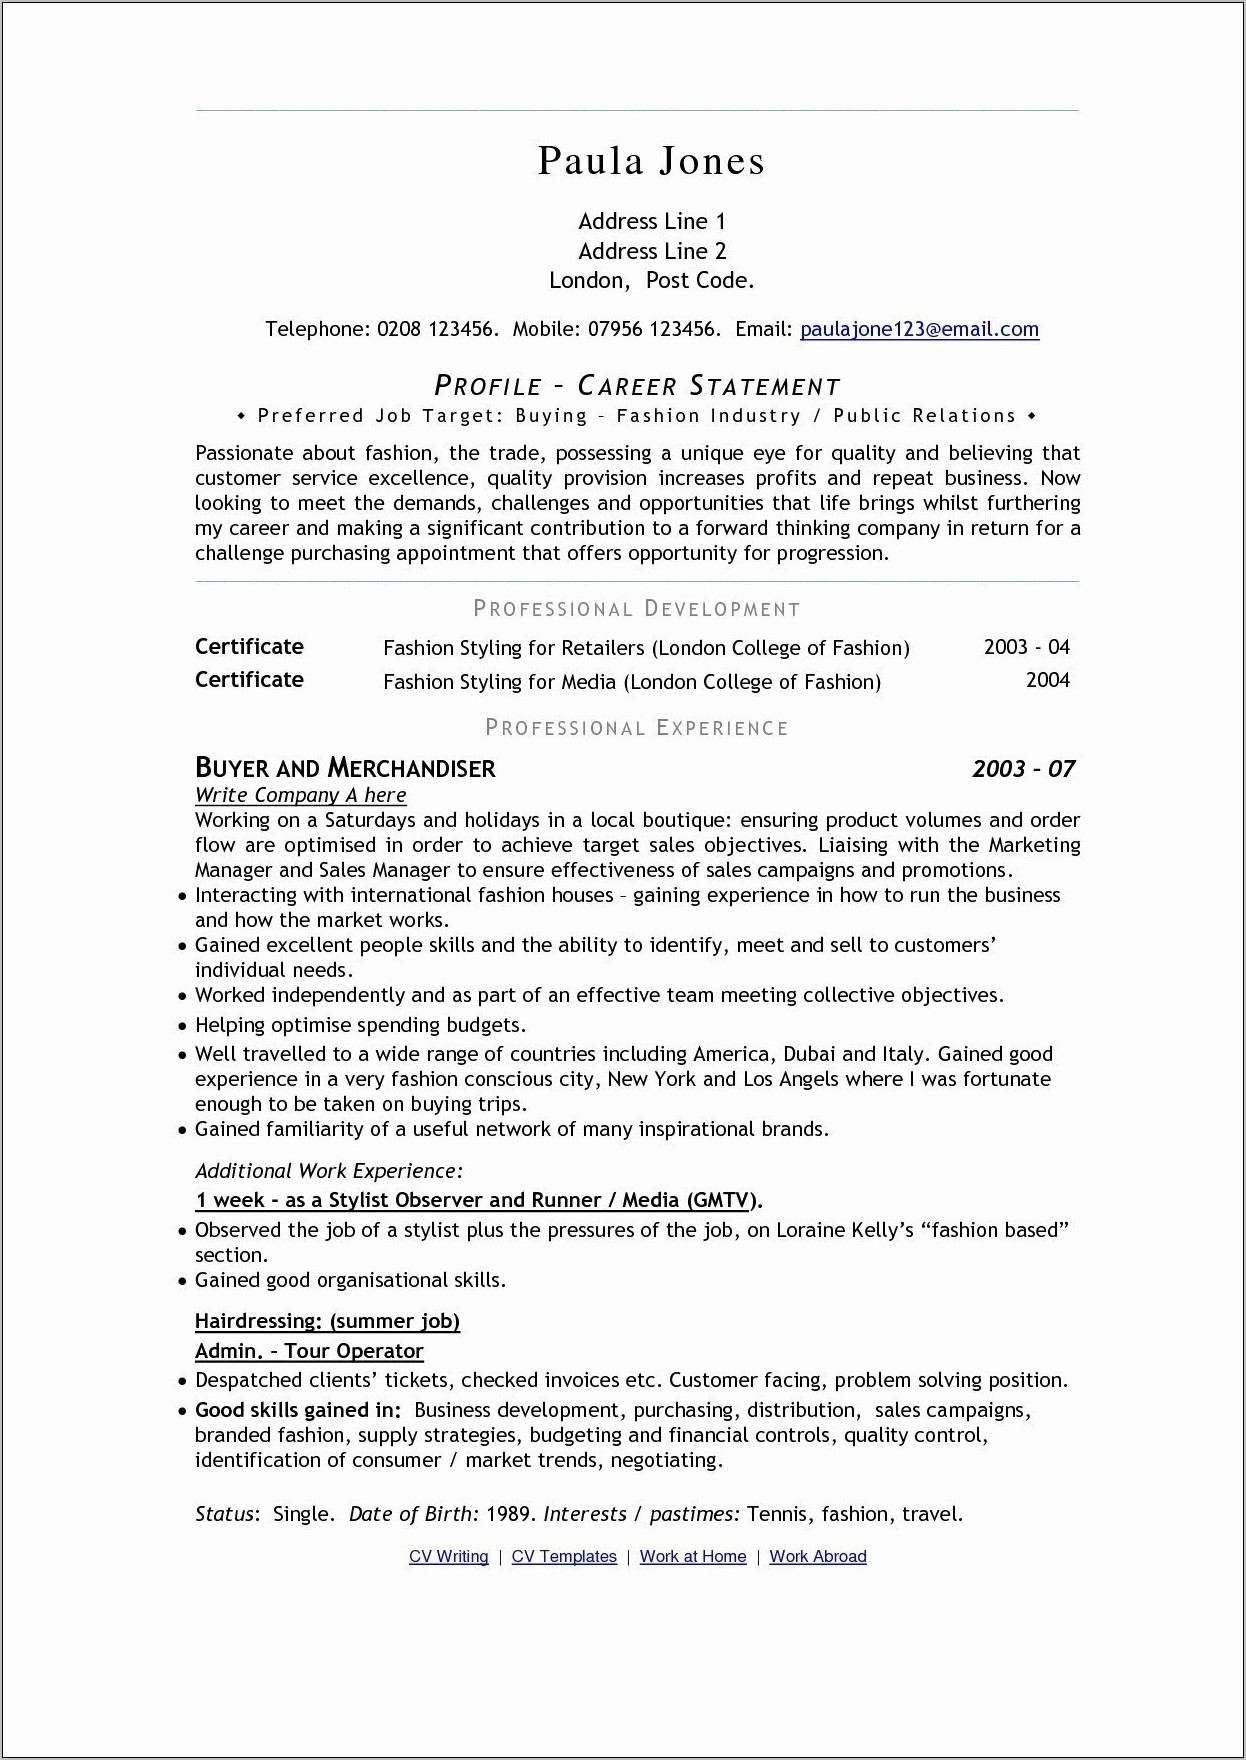 Resume Objective Examples For Sales Positions